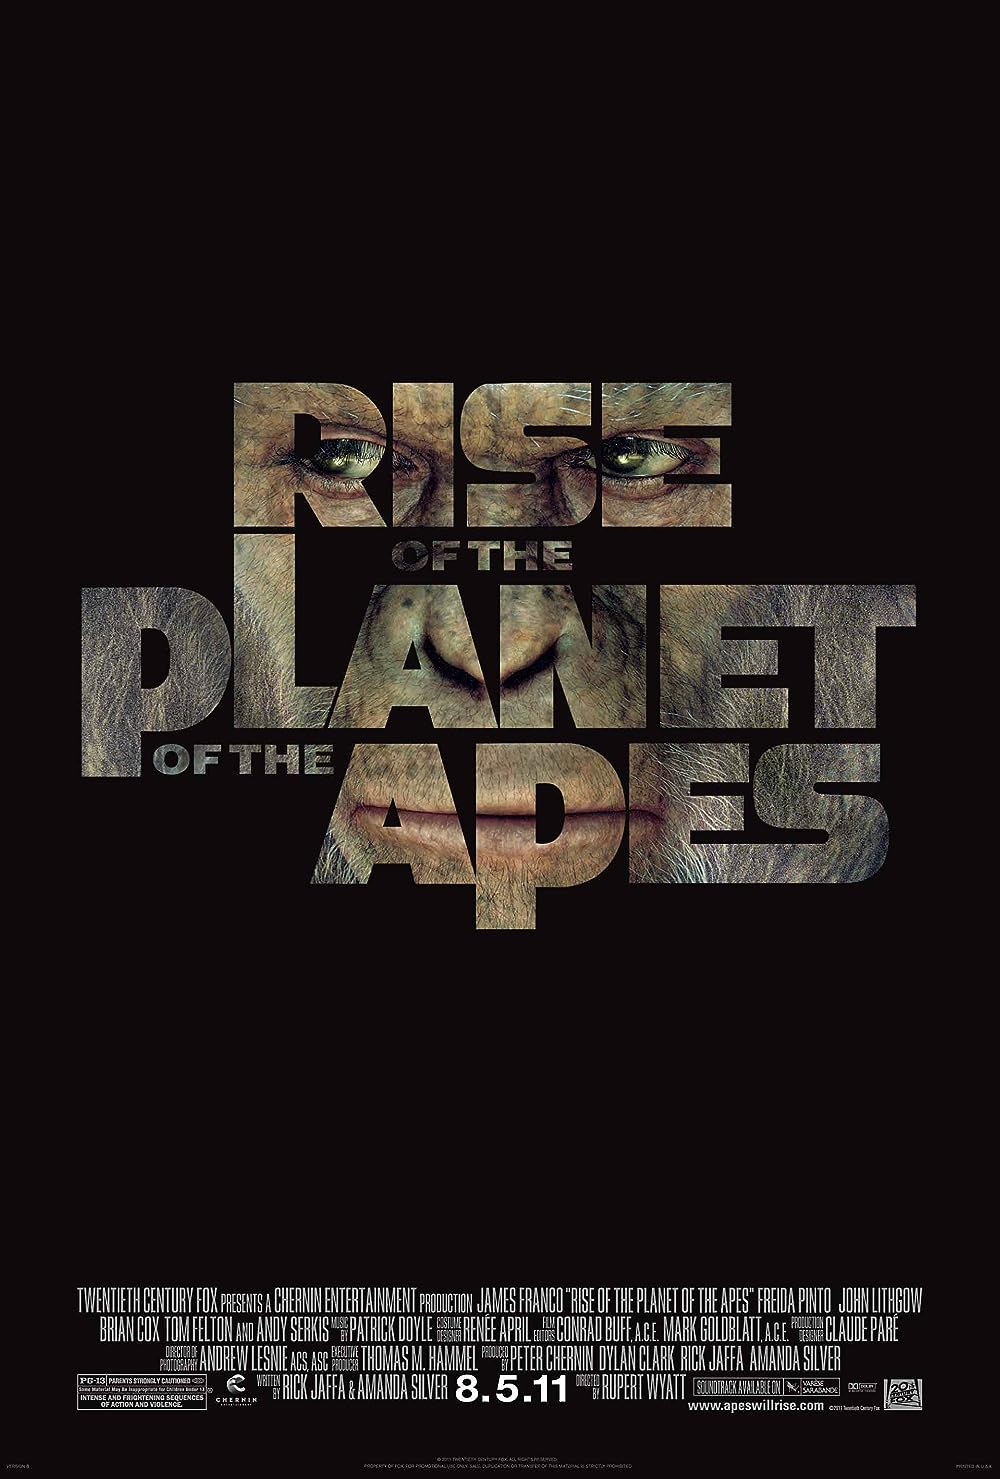 Rise of the Planet of the Apes sci-fi movies